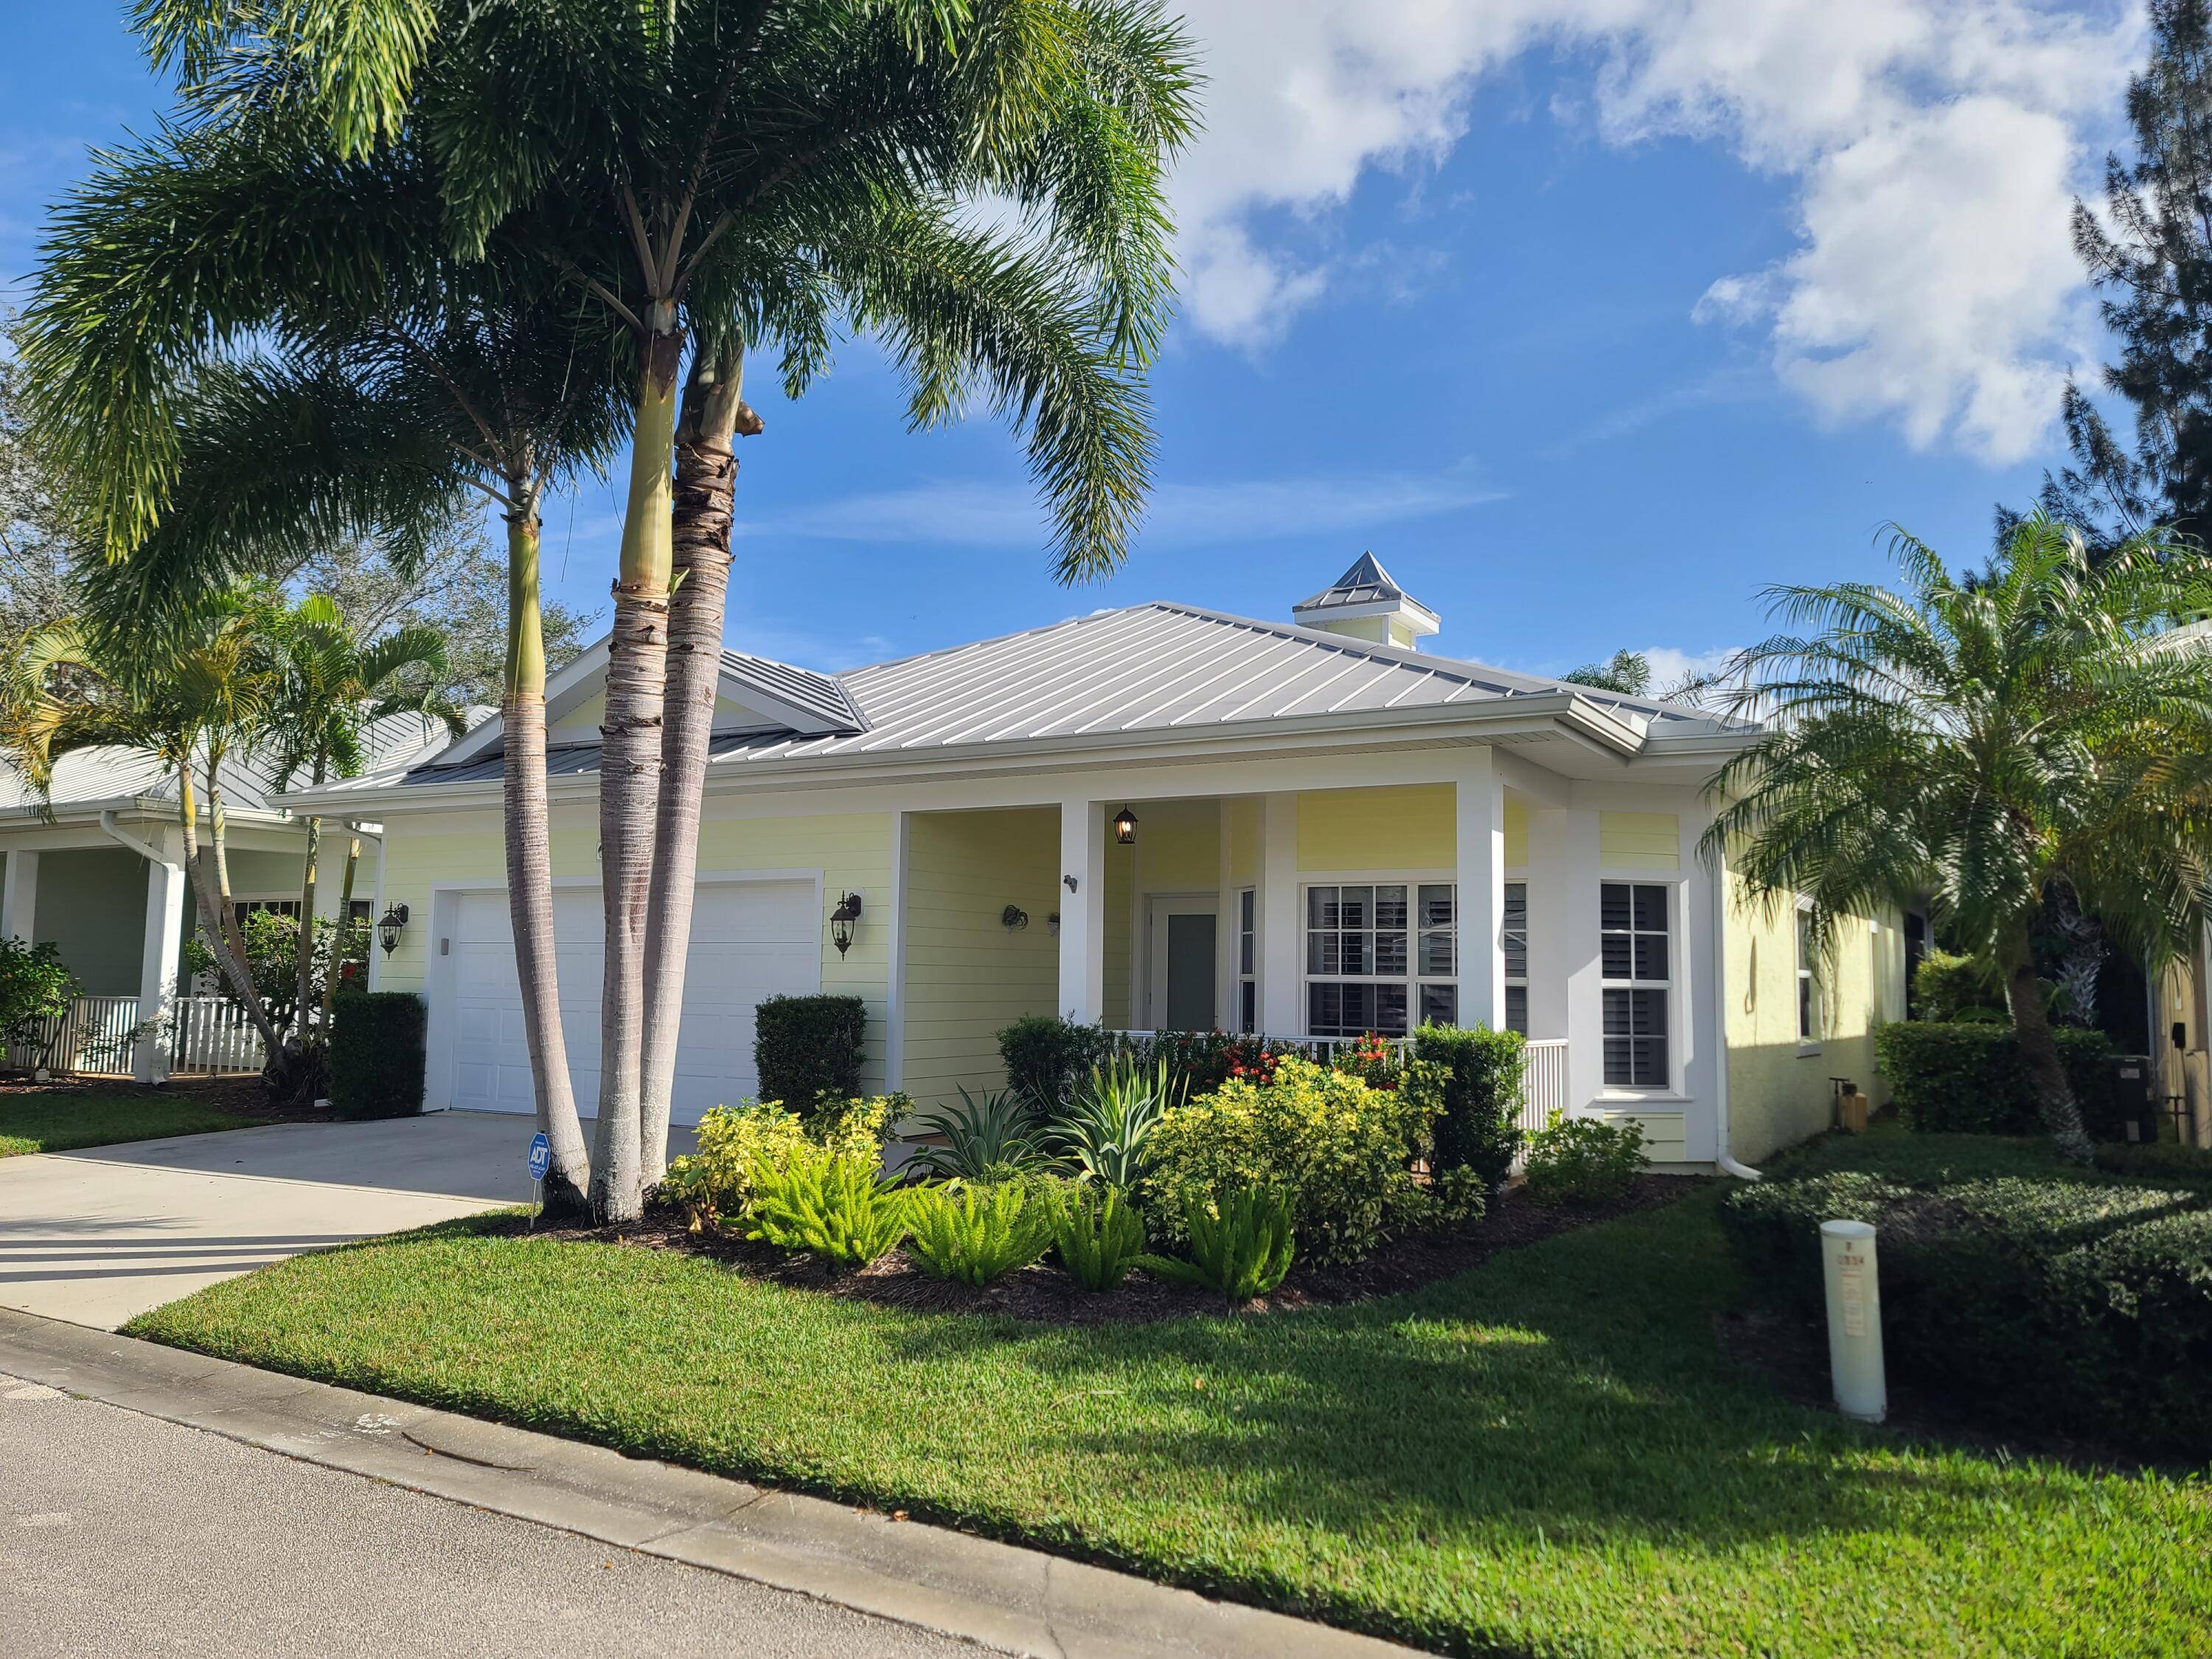 Welcome to 2128 NW Tilia Trl, a captivating ranch style oasis in the heart of Stuart, Florida.